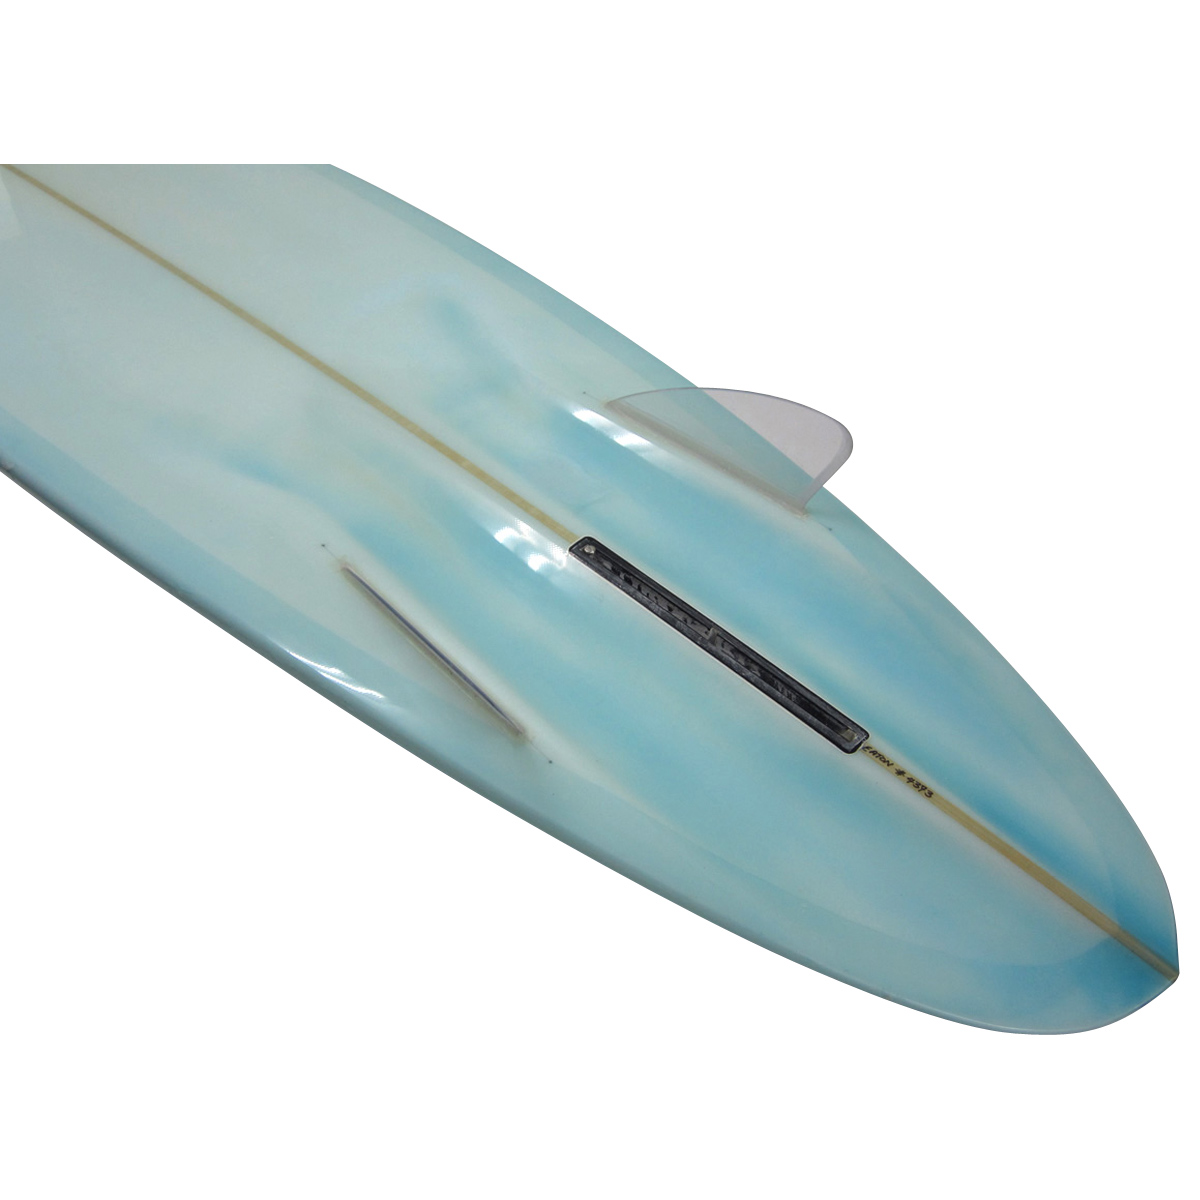 EATON SURFBOARDS / 9`3 Bonzer Shaped By Mike Eaton